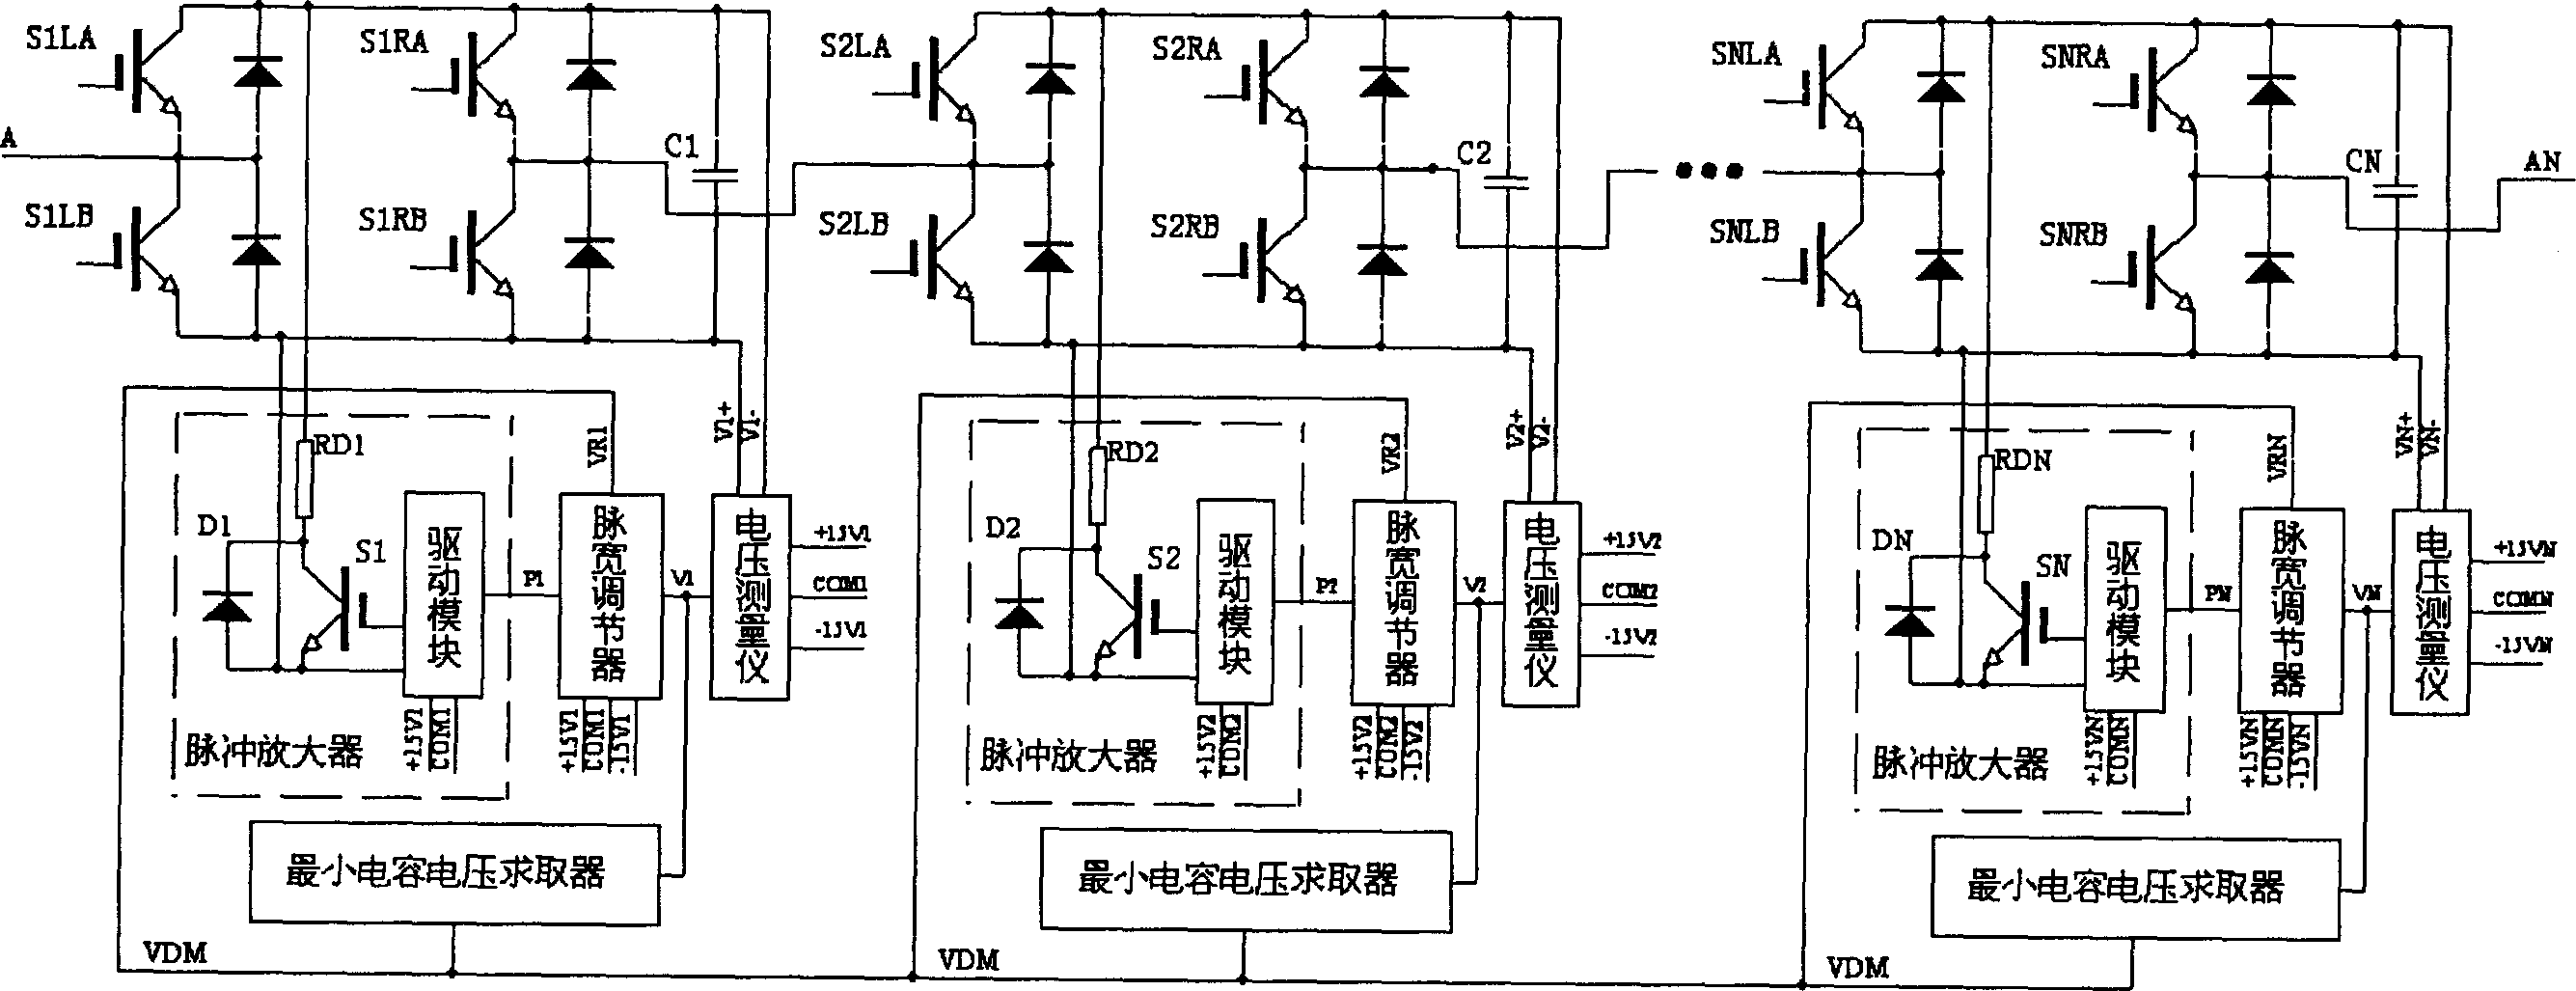 Direct current voltage balancing circuit of reactive generating device based on chained invertor